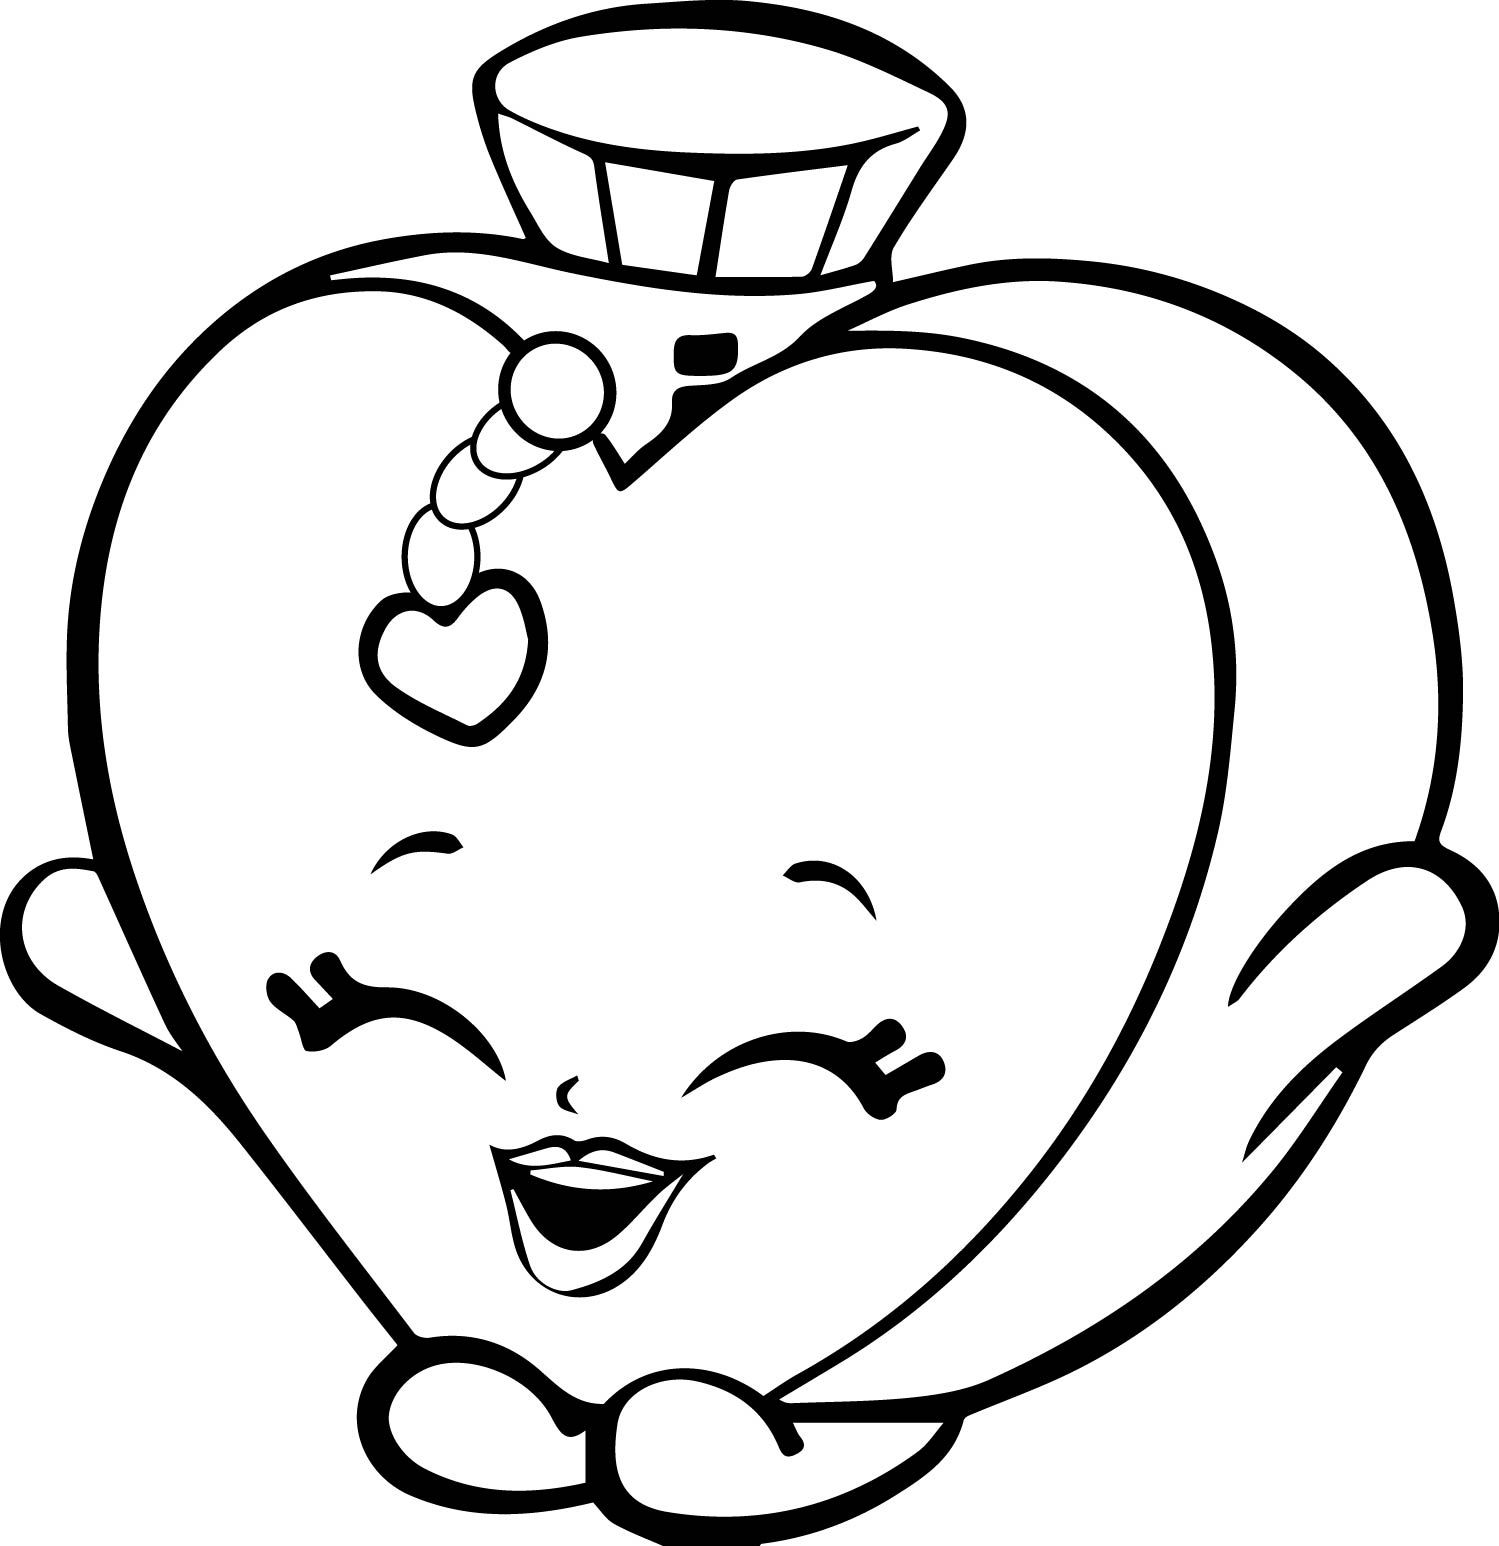 Heart Shopkin Coloring Page